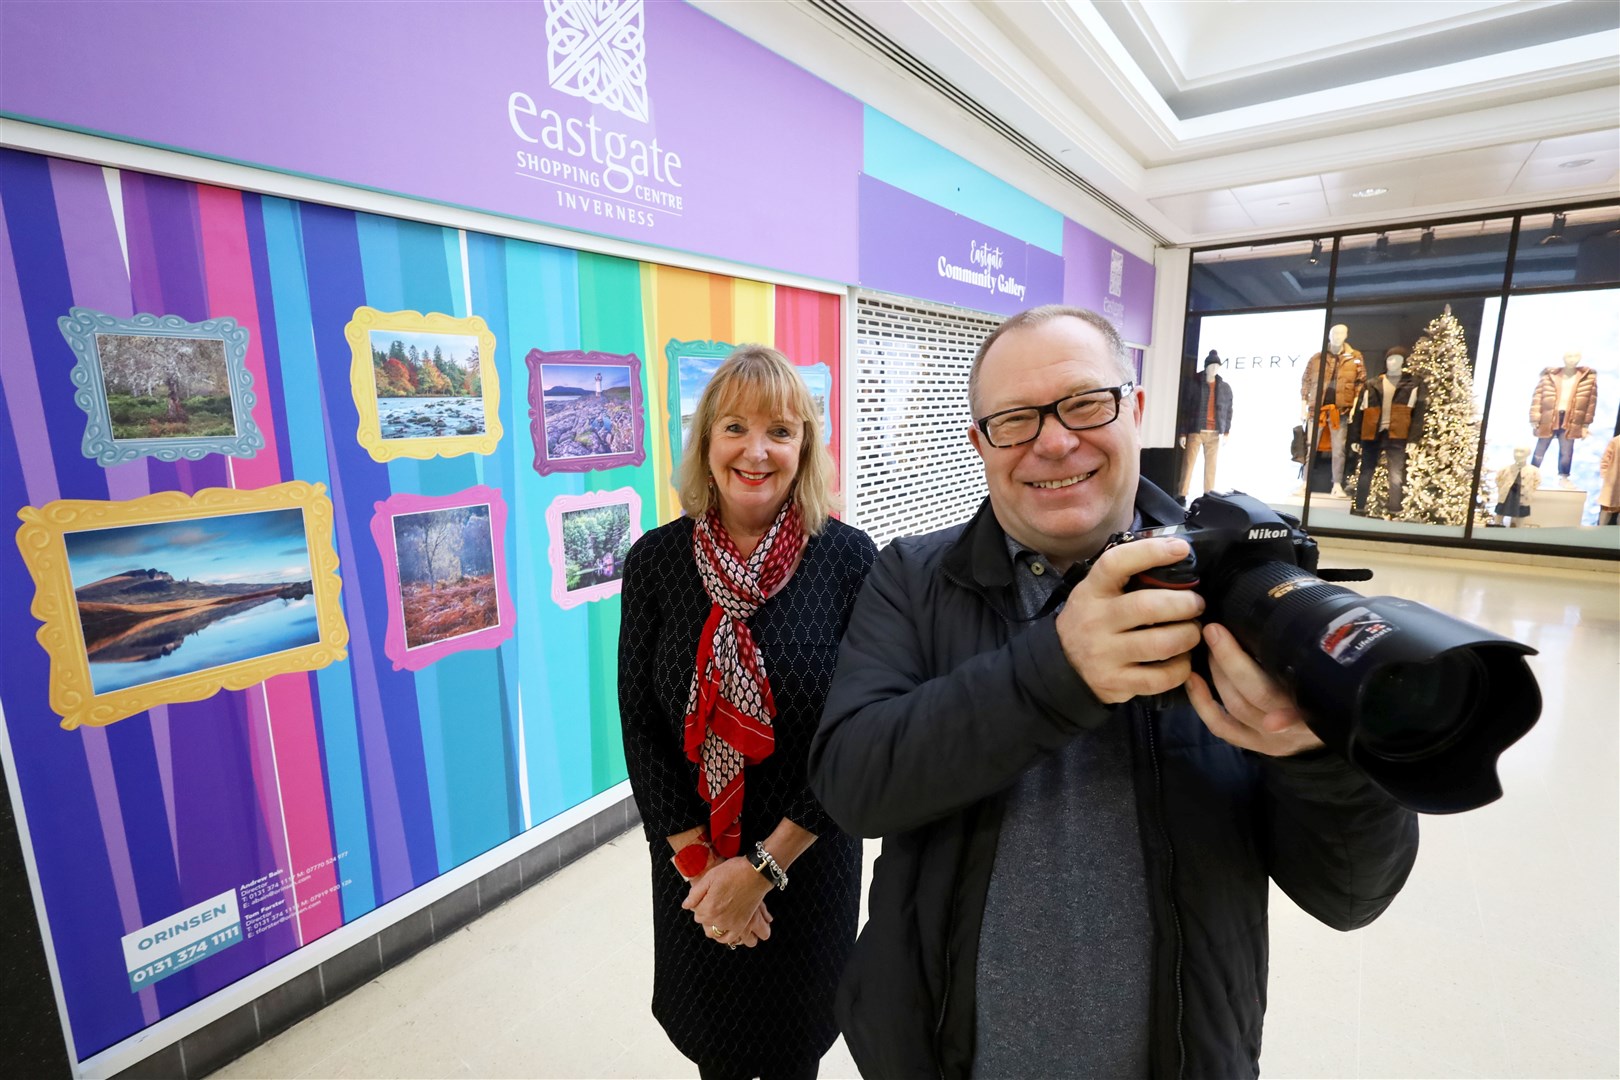 Photographer John Frid and Eastgate Shopping Centre manager Jackie Cuddy take a look at the exhibition.